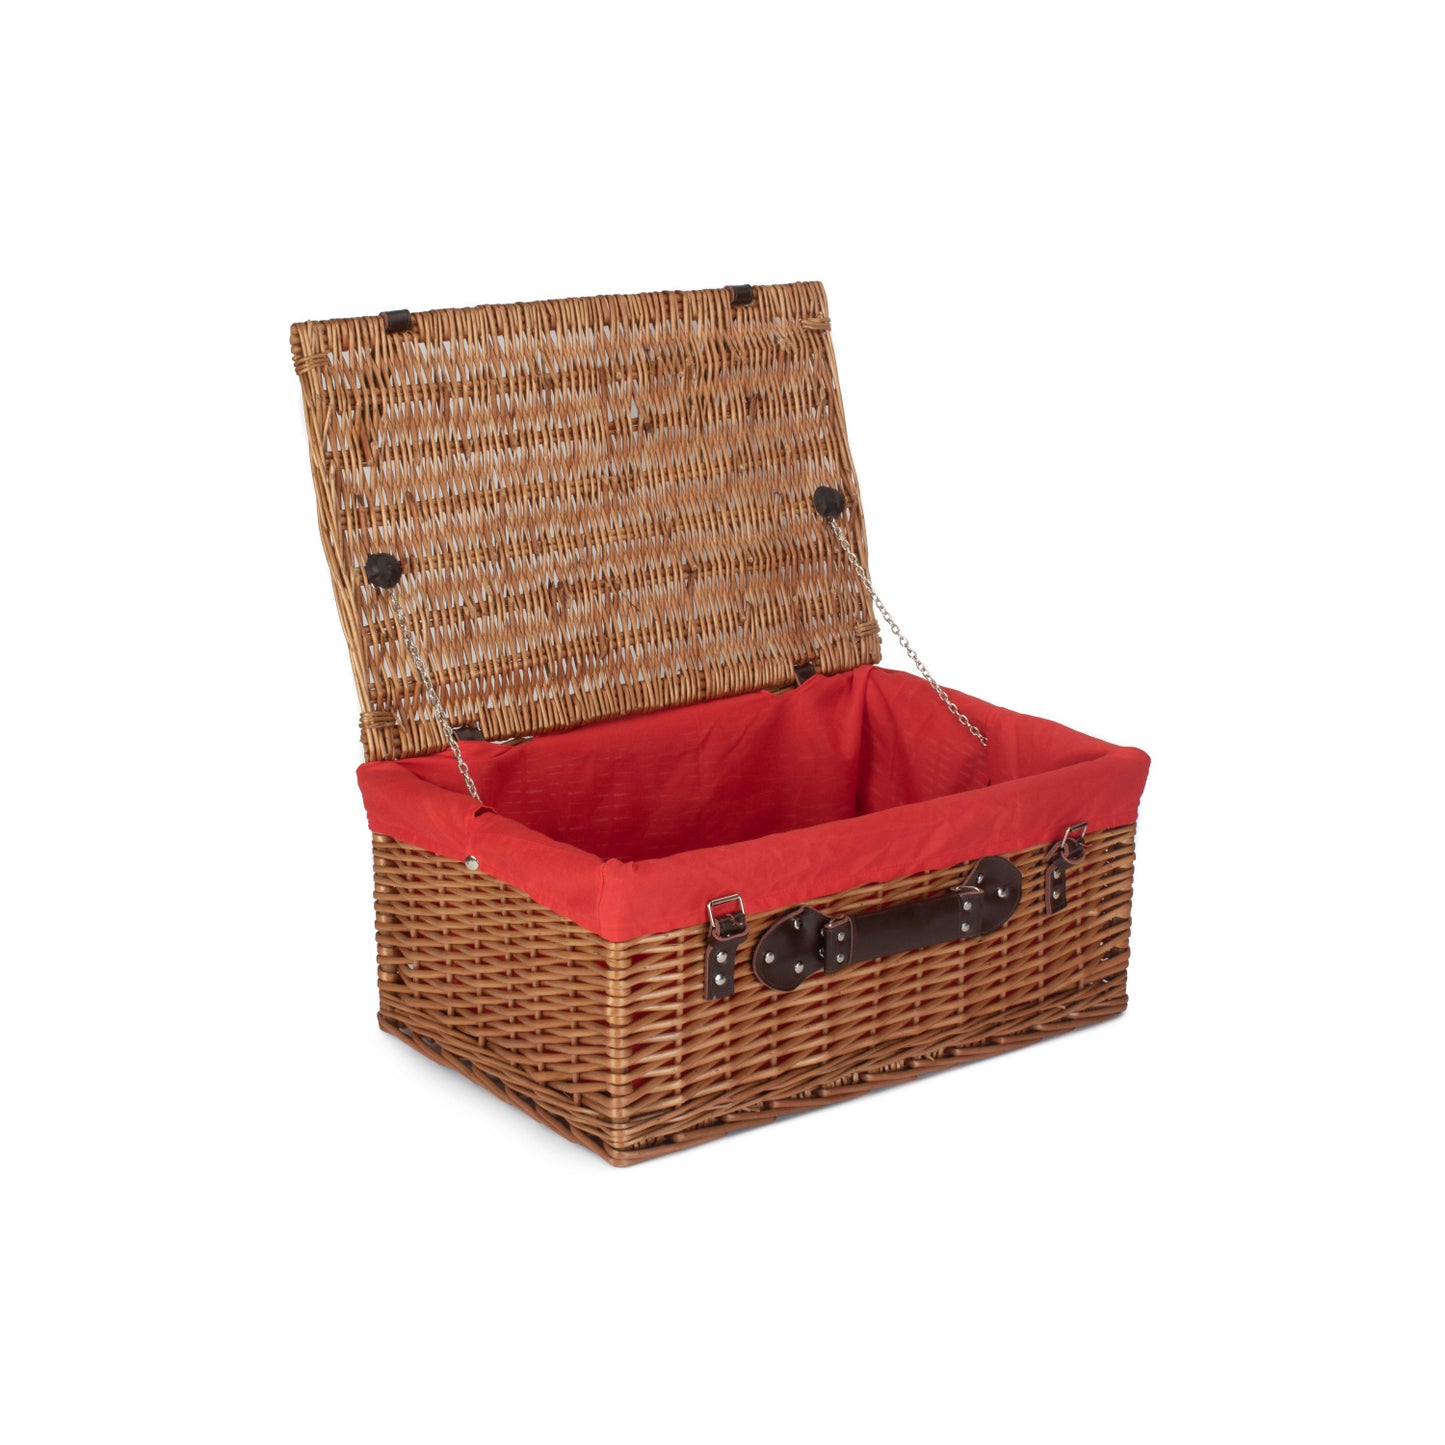 22 Inch Double Steamed Hamper With Red Lining